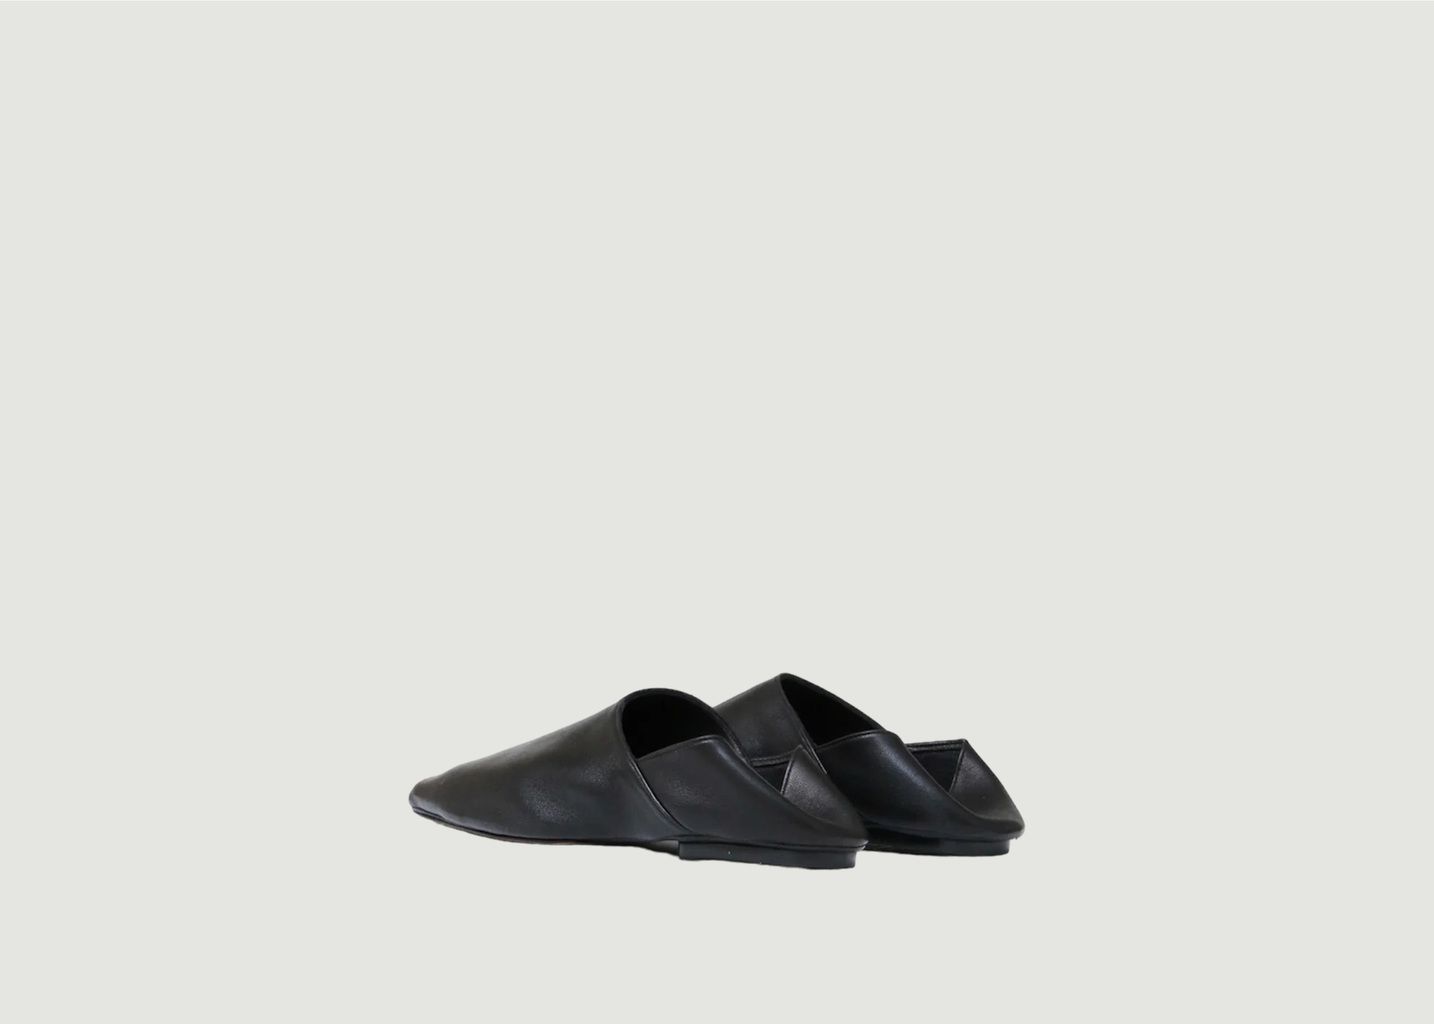 Altamira slippers in soft leather - Souliers Martinez